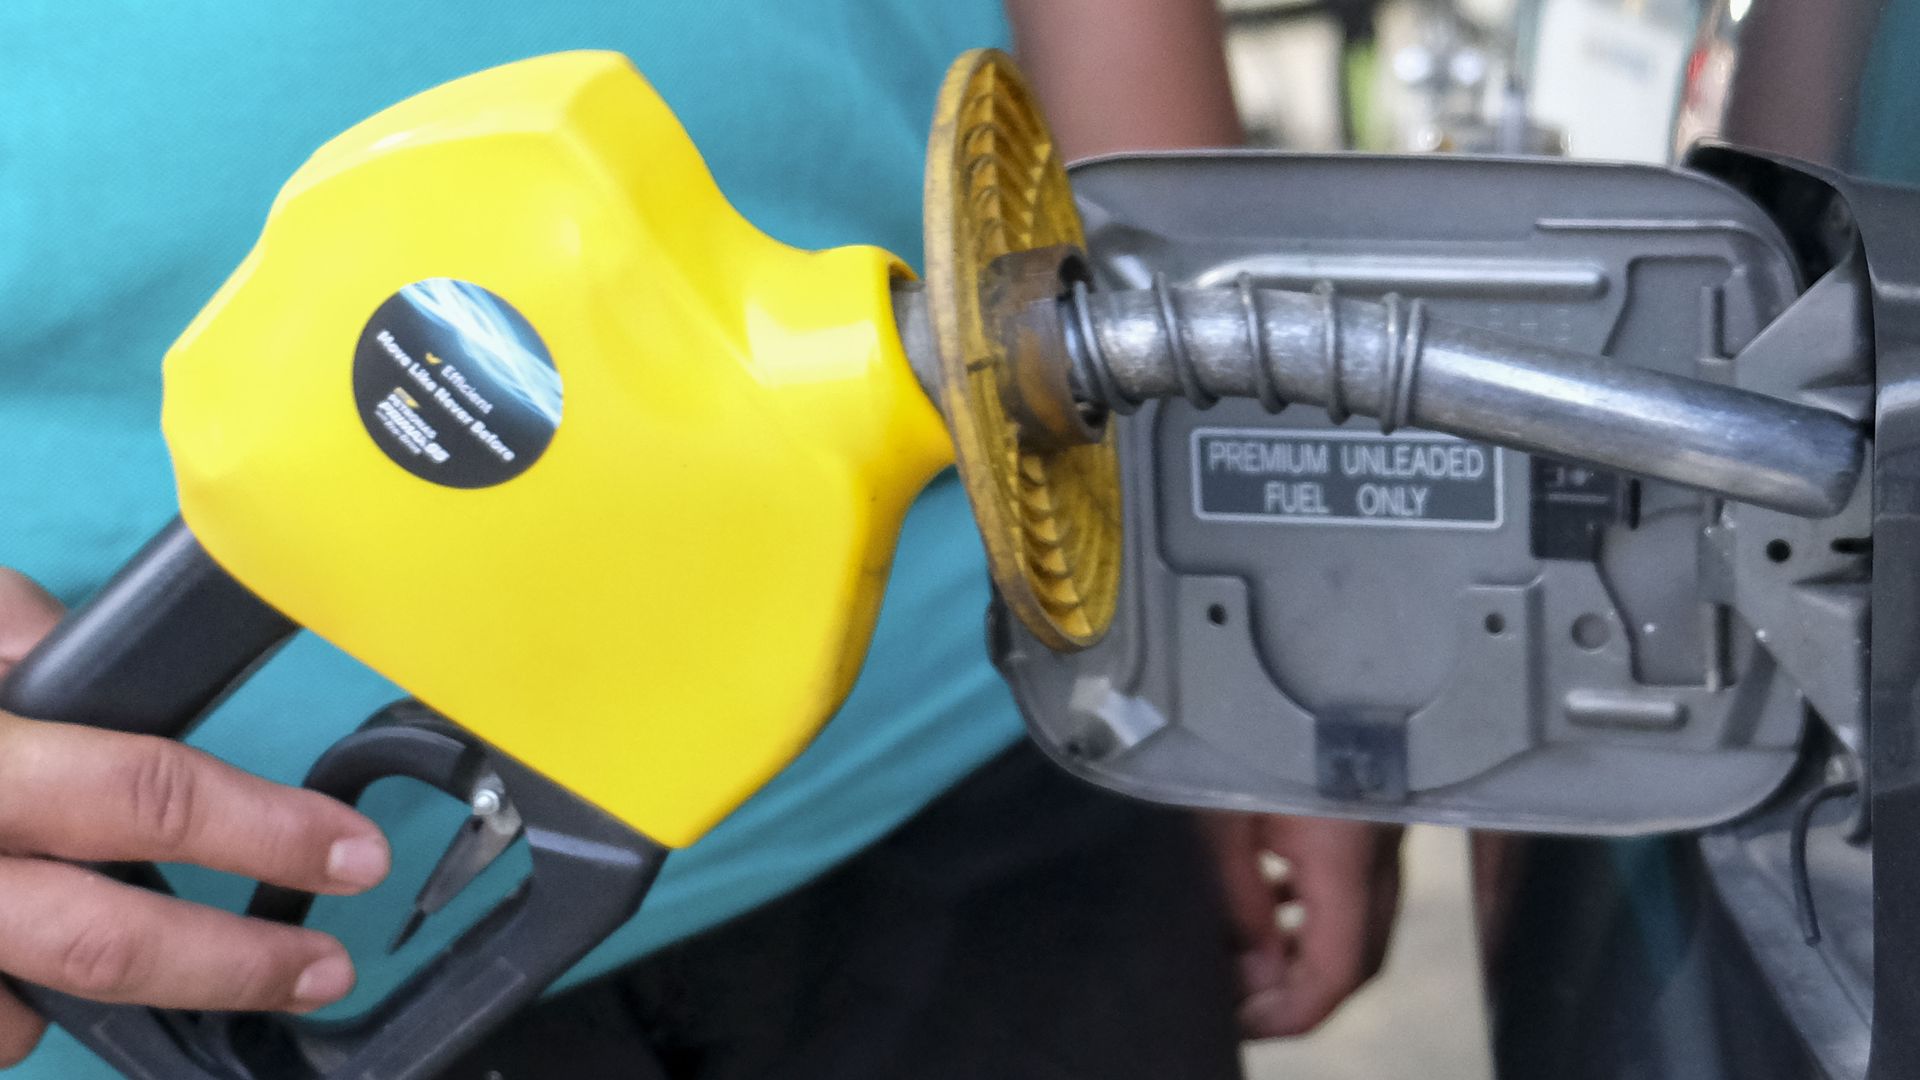 A man seen holding the petrol nozzle at a Petronas oil